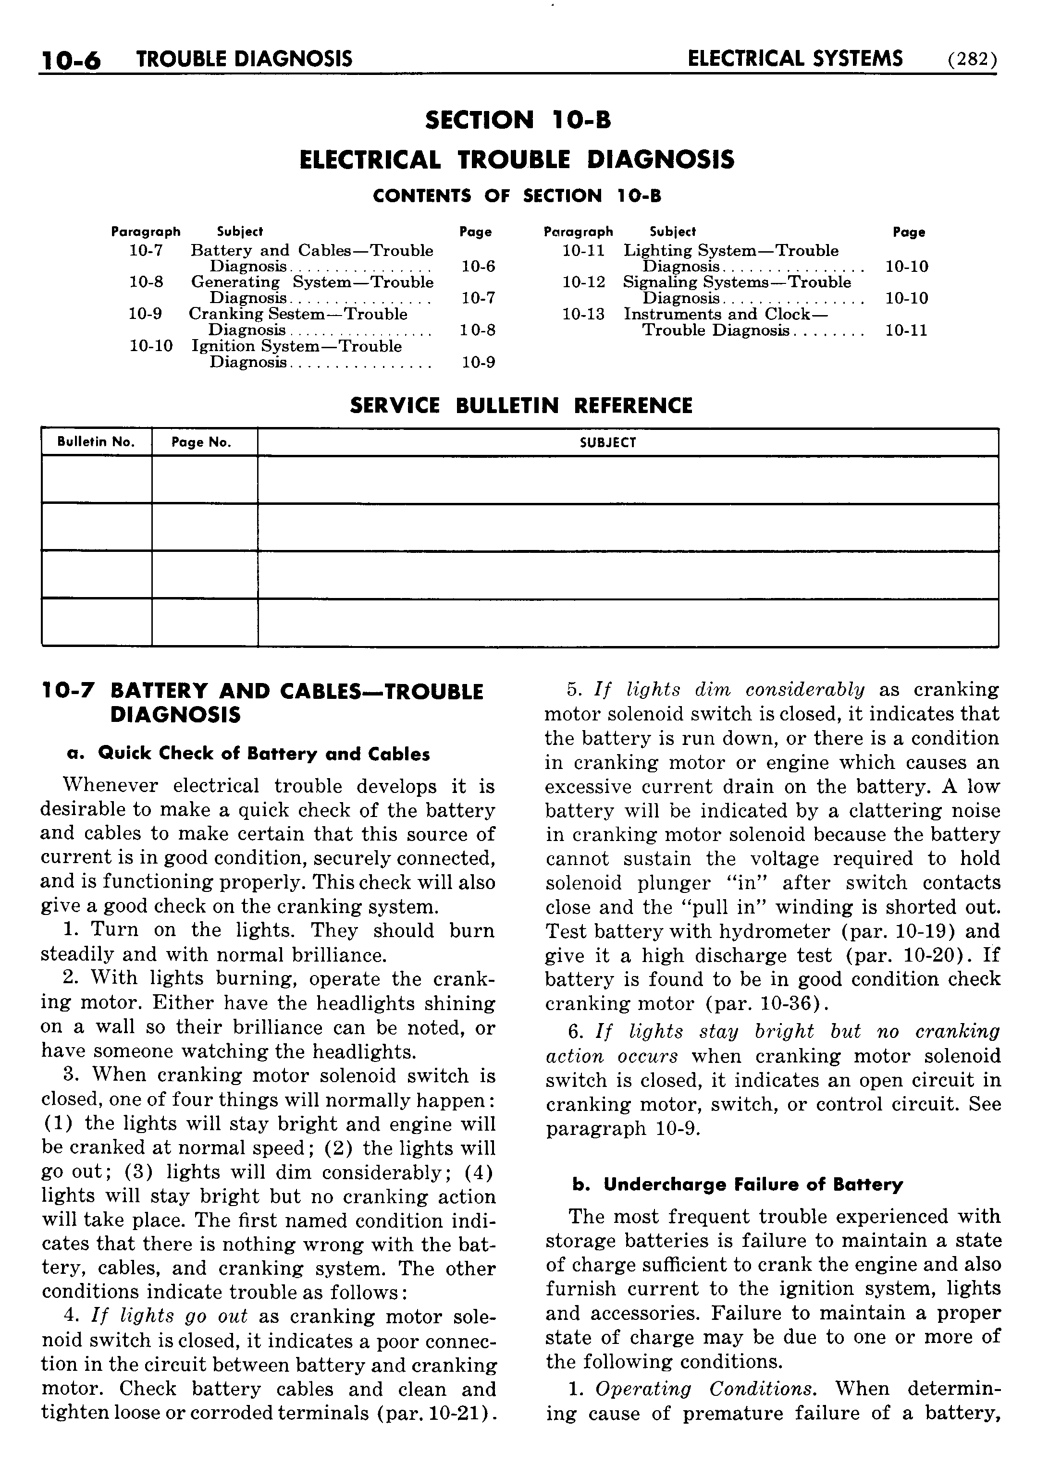 n_11 1948 Buick Shop Manual - Electrical Systems-006-006.jpg